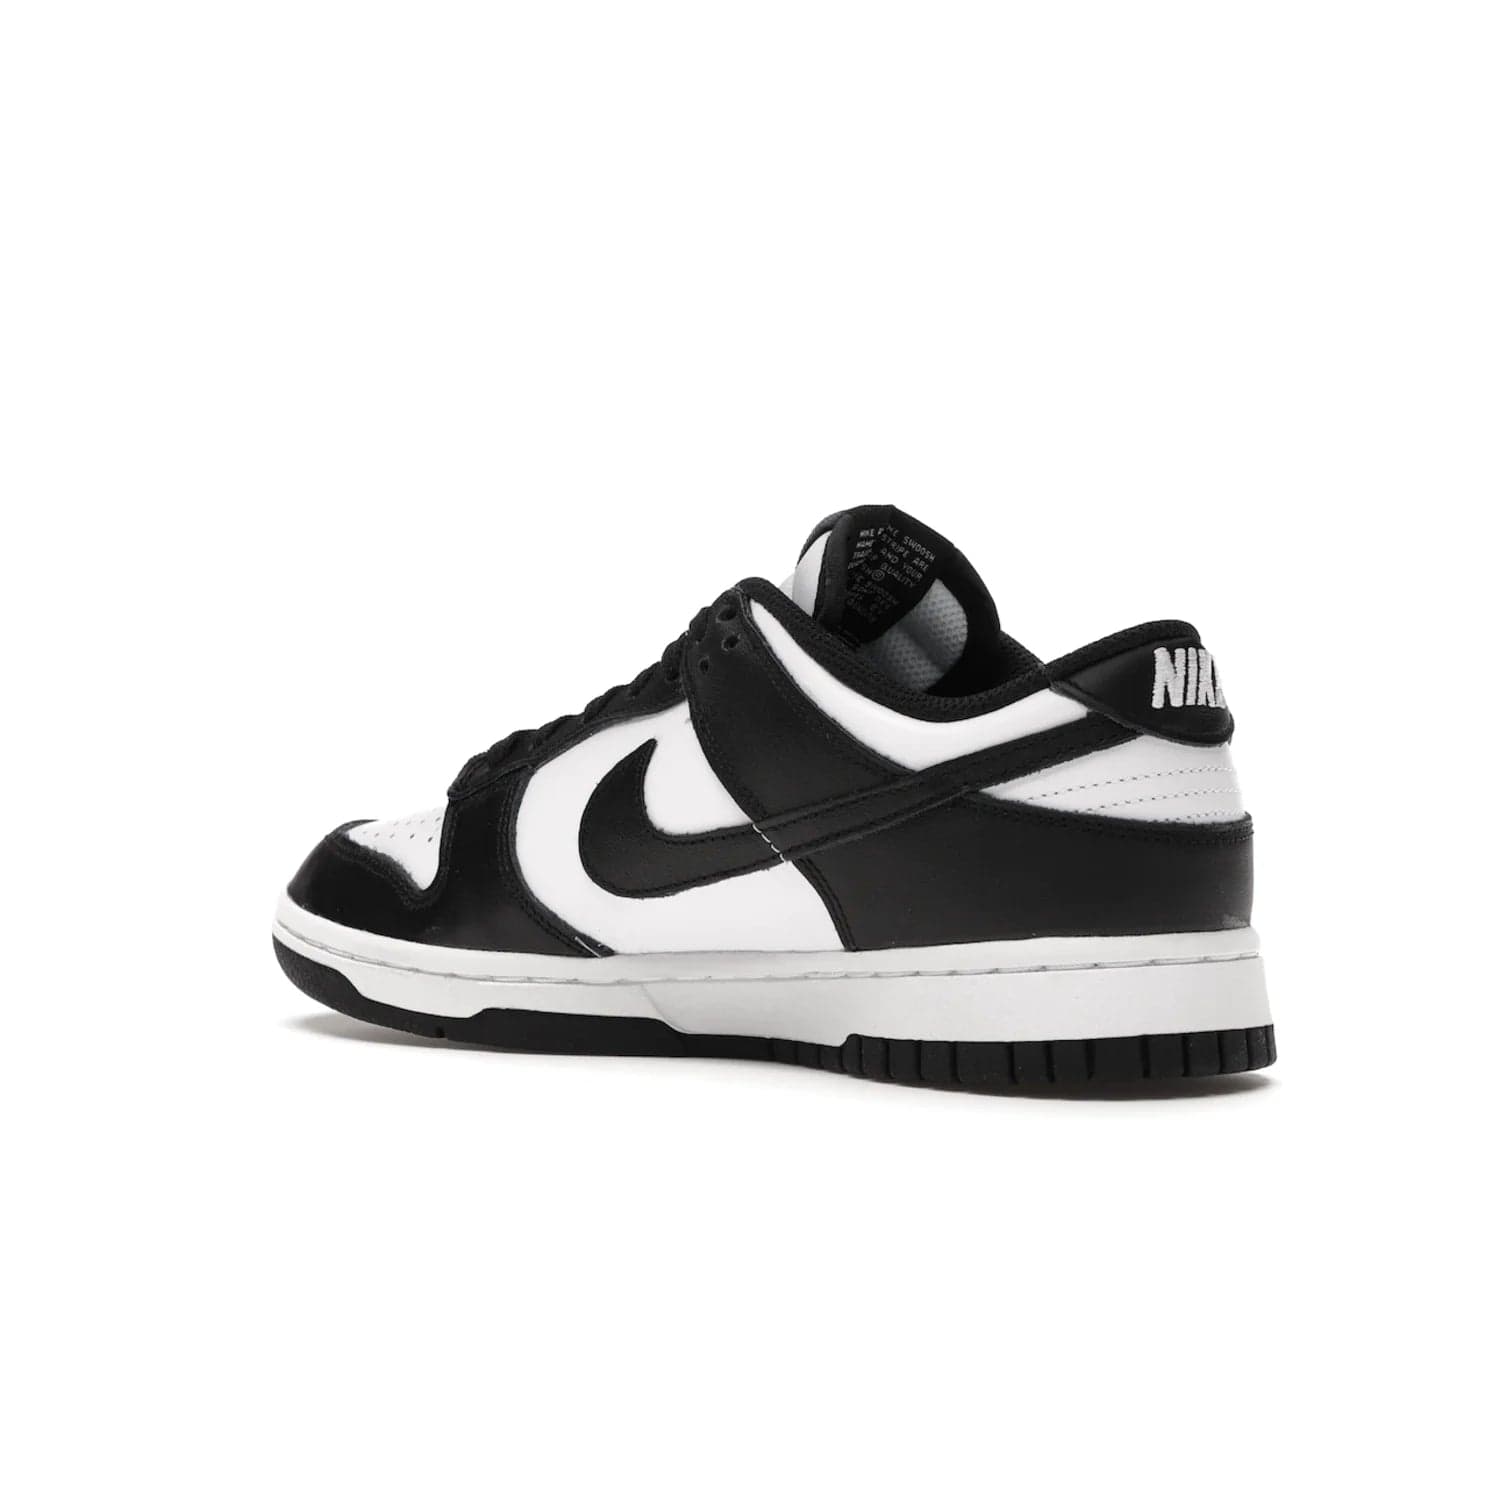 Nike Dunk Low Retro White Black Panda (2021) (Women's) - Image 23 - Only at www.BallersClubKickz.com - Say hello to the new Nike Dunk Low Retro White Black Panda (2021) (Women's)! White & black leather upper with Nike Swoosh logo. Get your pair for $100 in March 2021! Shop now!